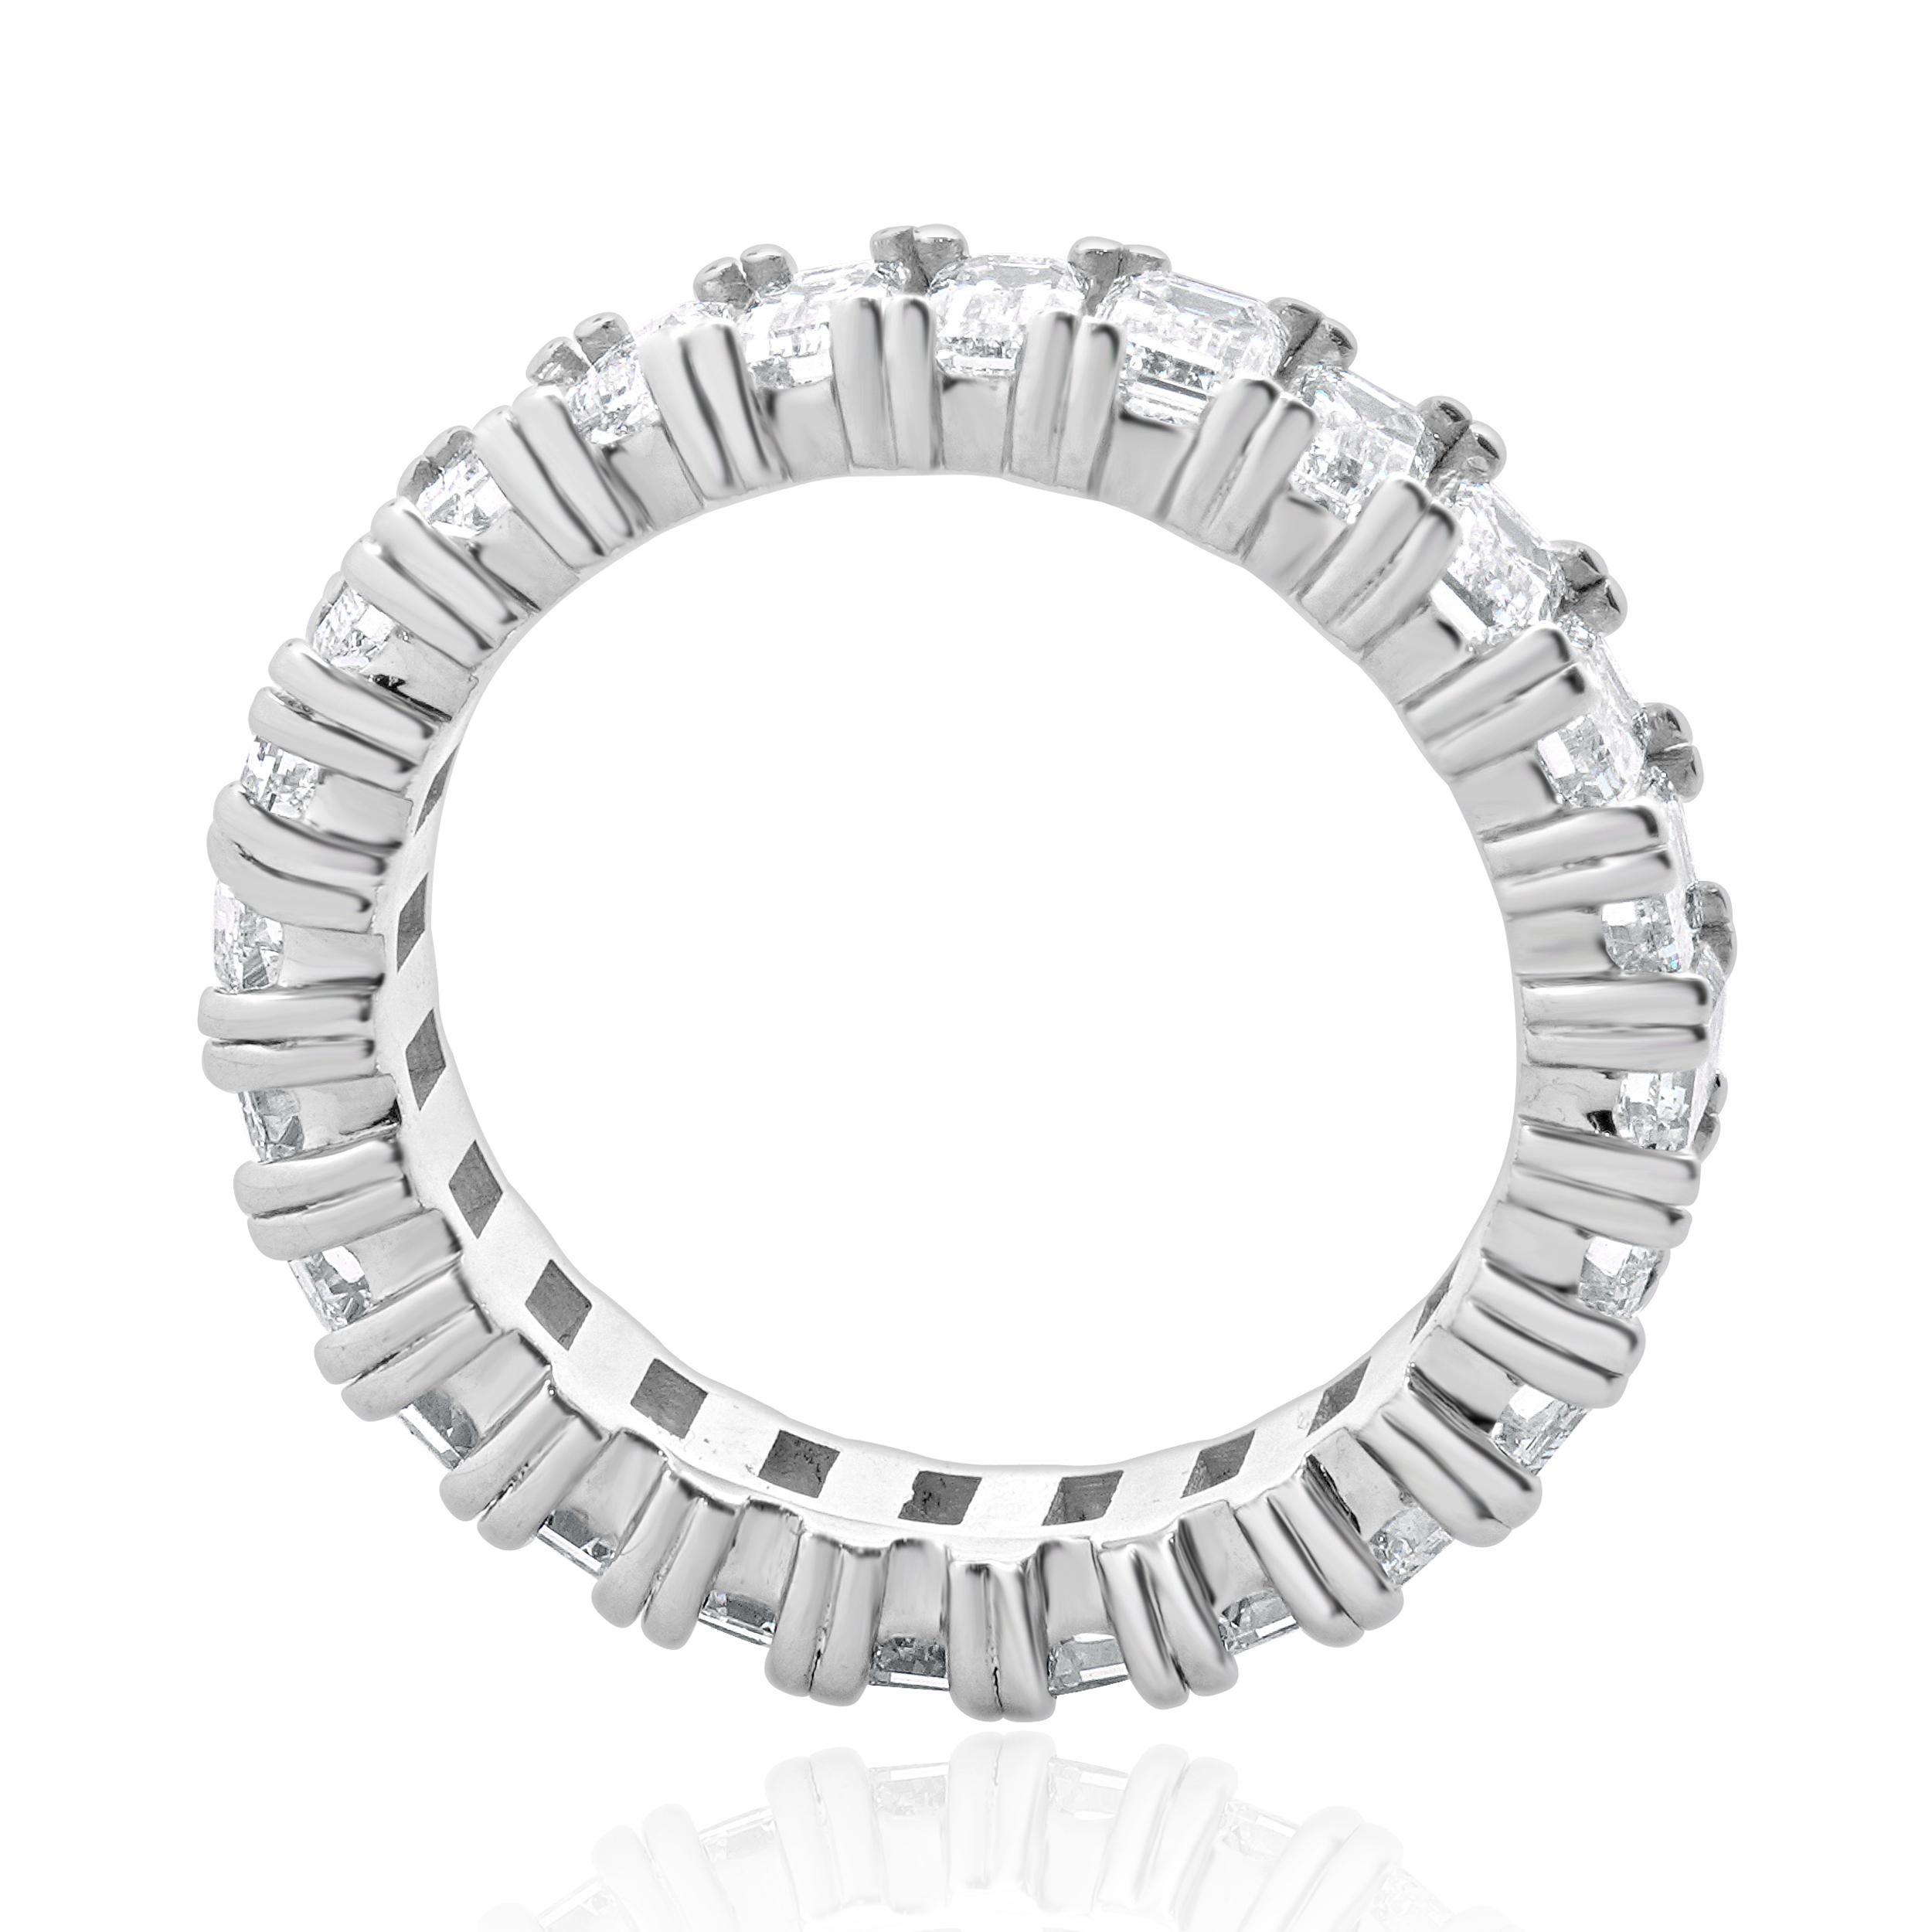 14 Karat White Gold Emerald Cut Diamond Eternity Band In Excellent Condition For Sale In Scottsdale, AZ